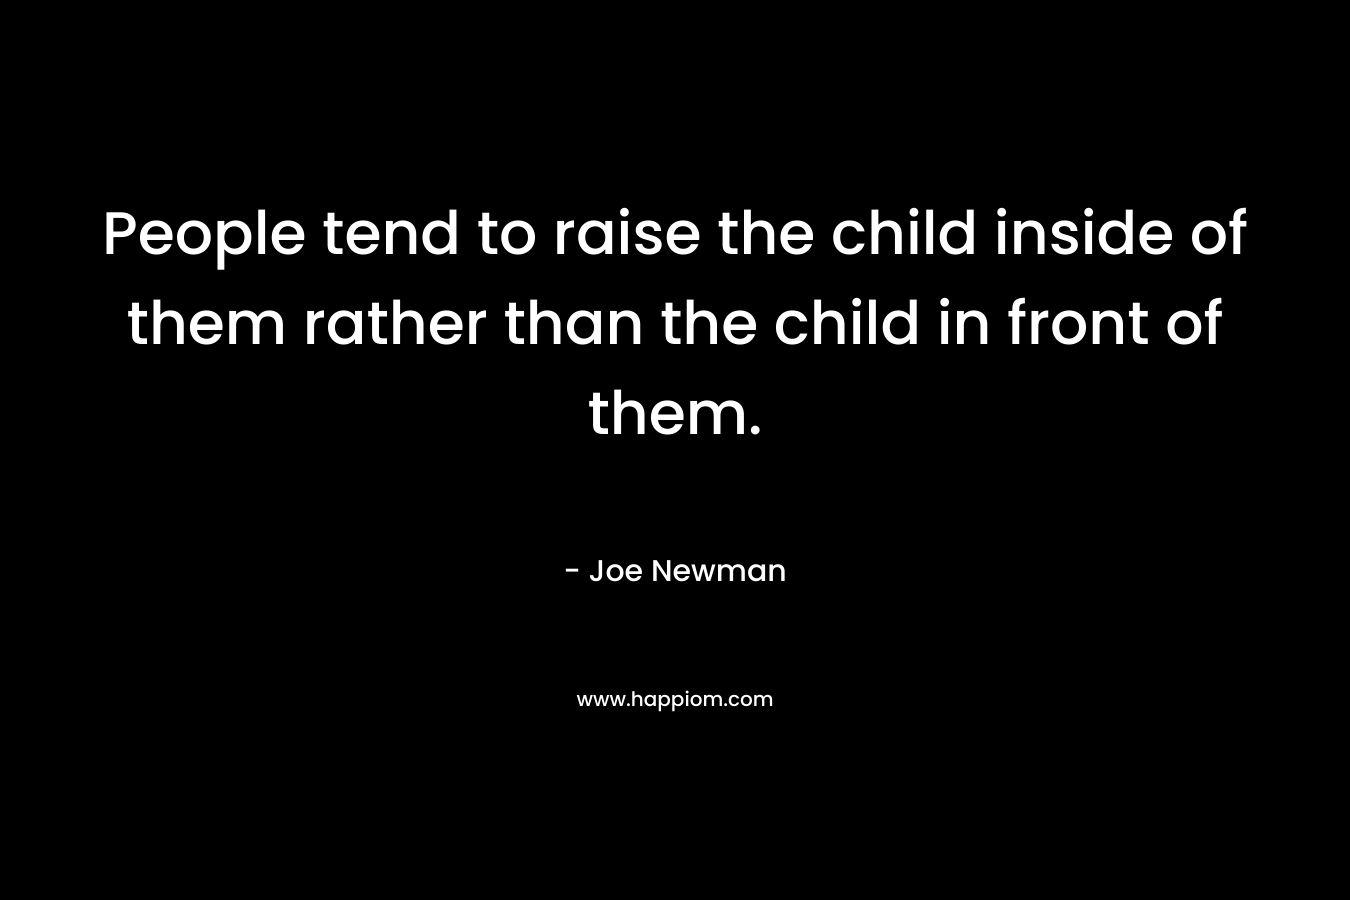 People tend to raise the child inside of them rather than the child in front of them.